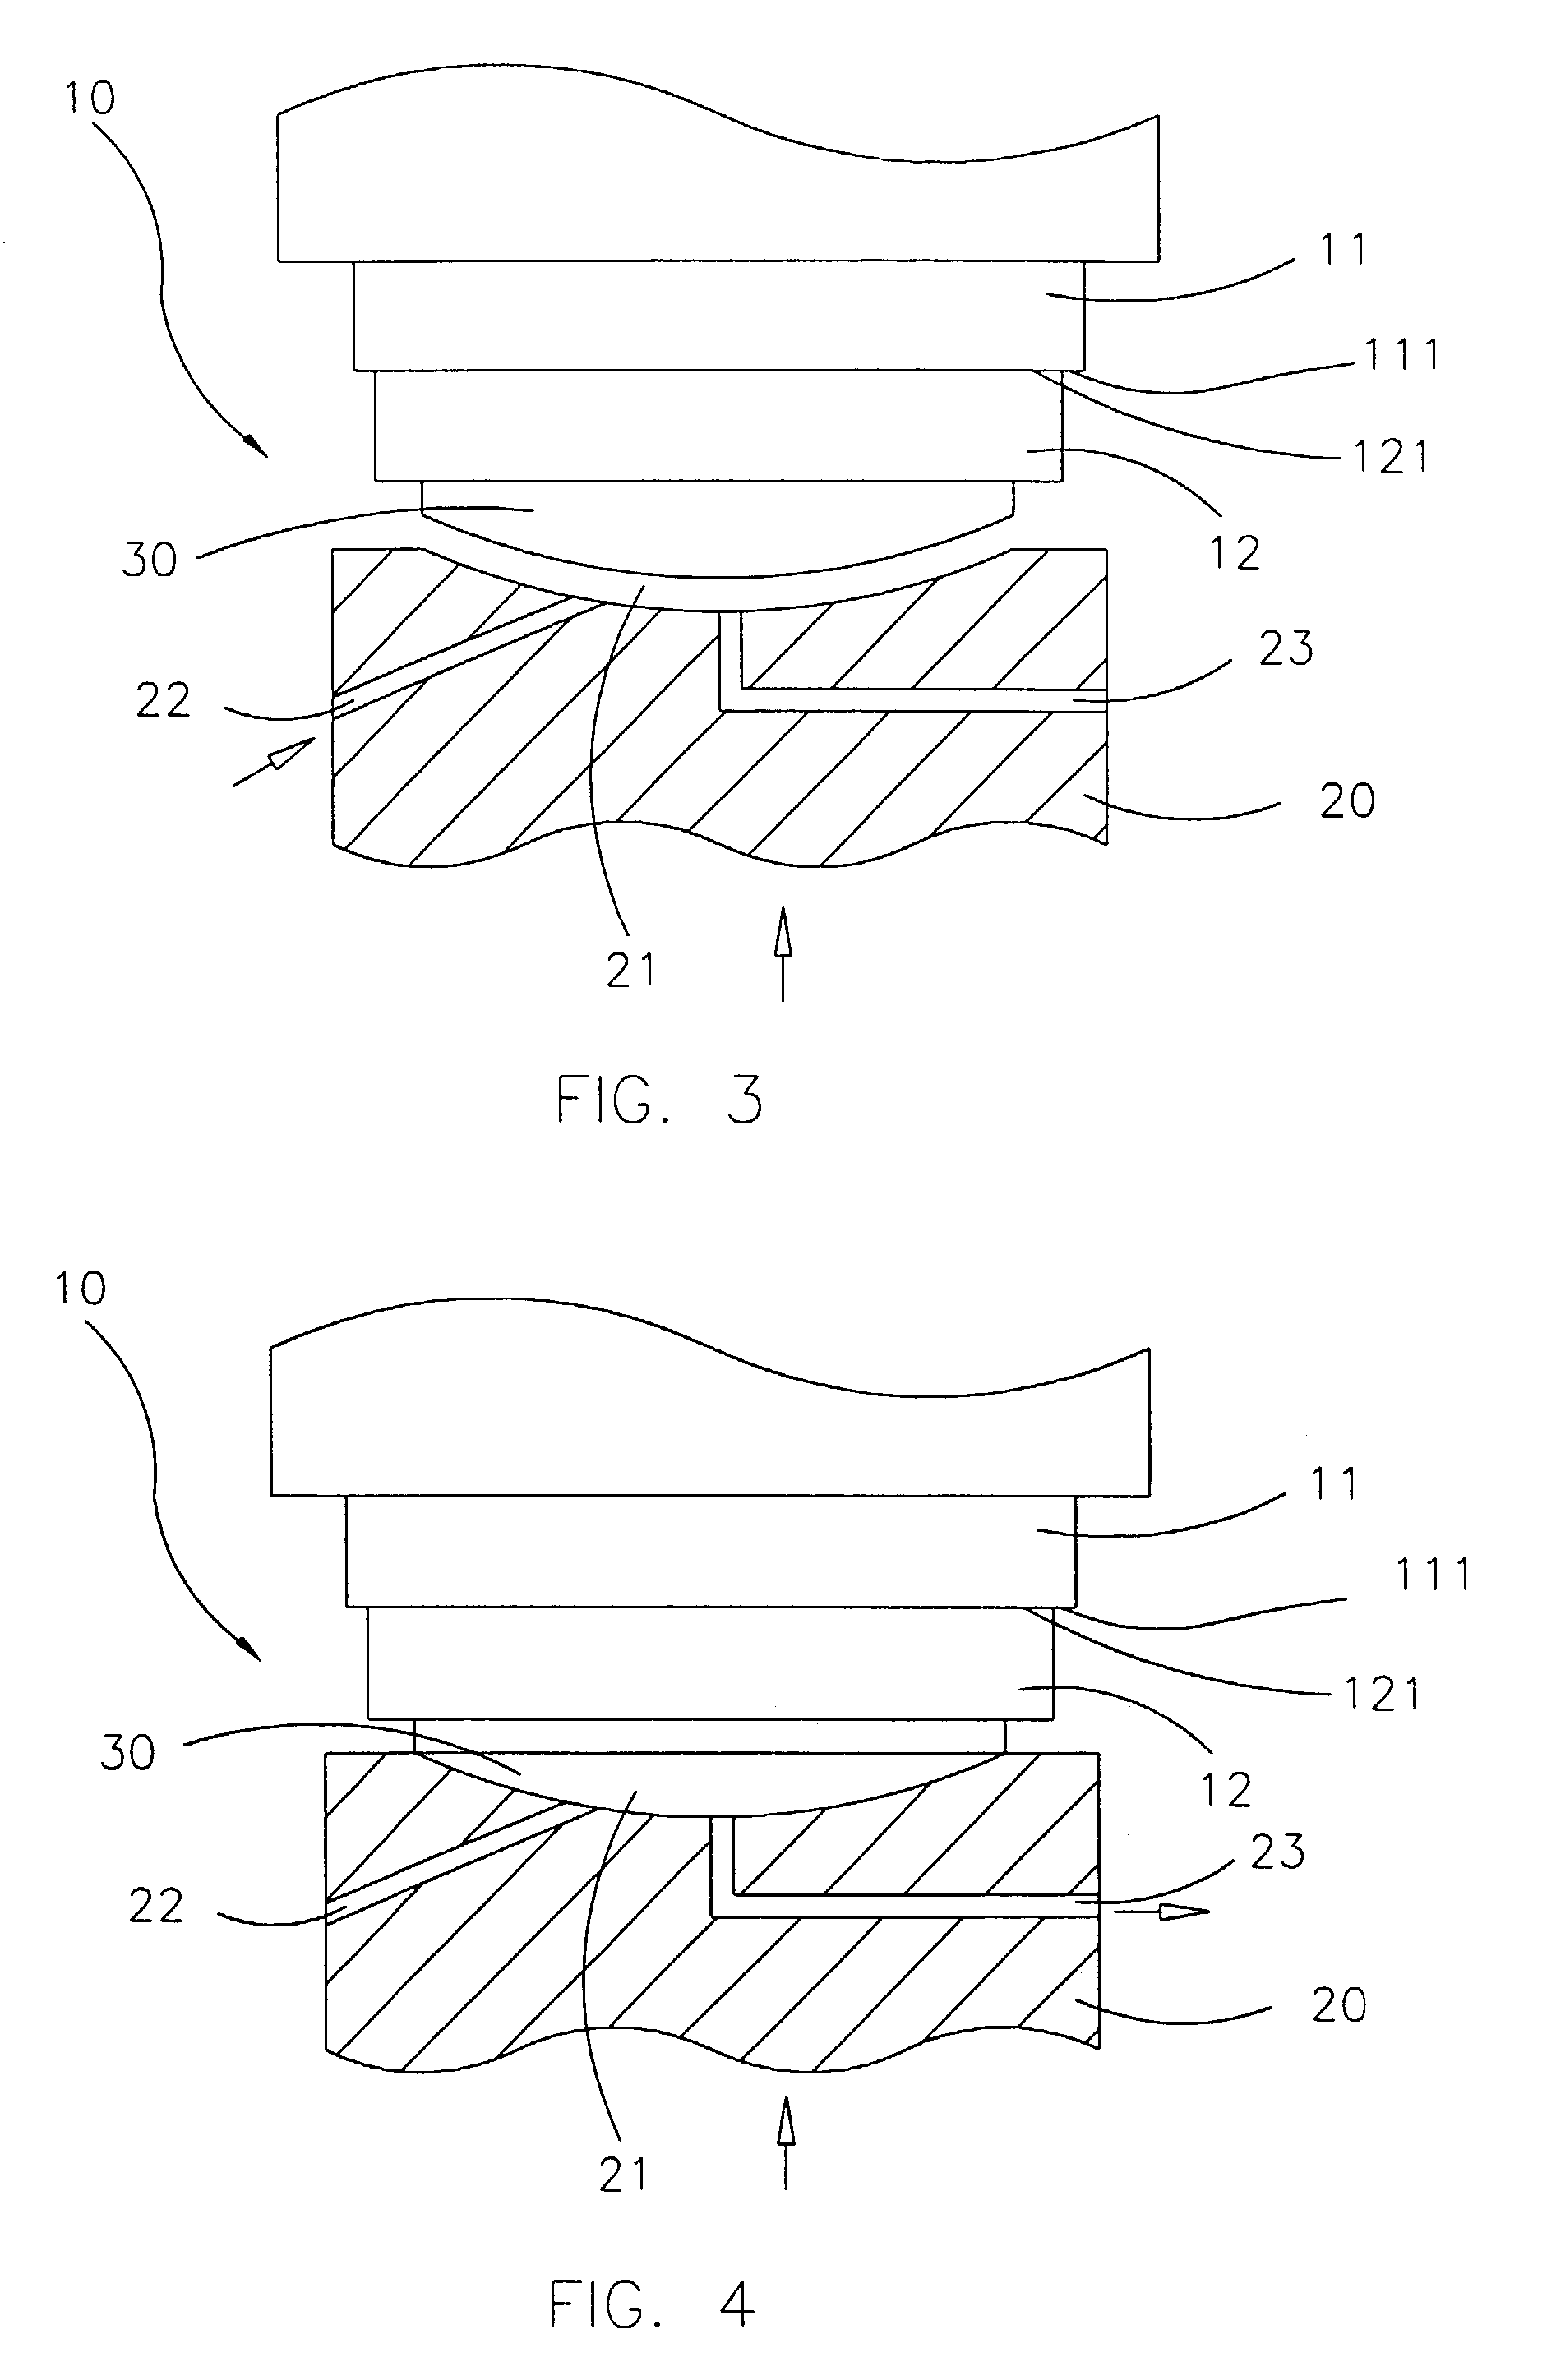 Hot embossing auto-leveling apparatus and method